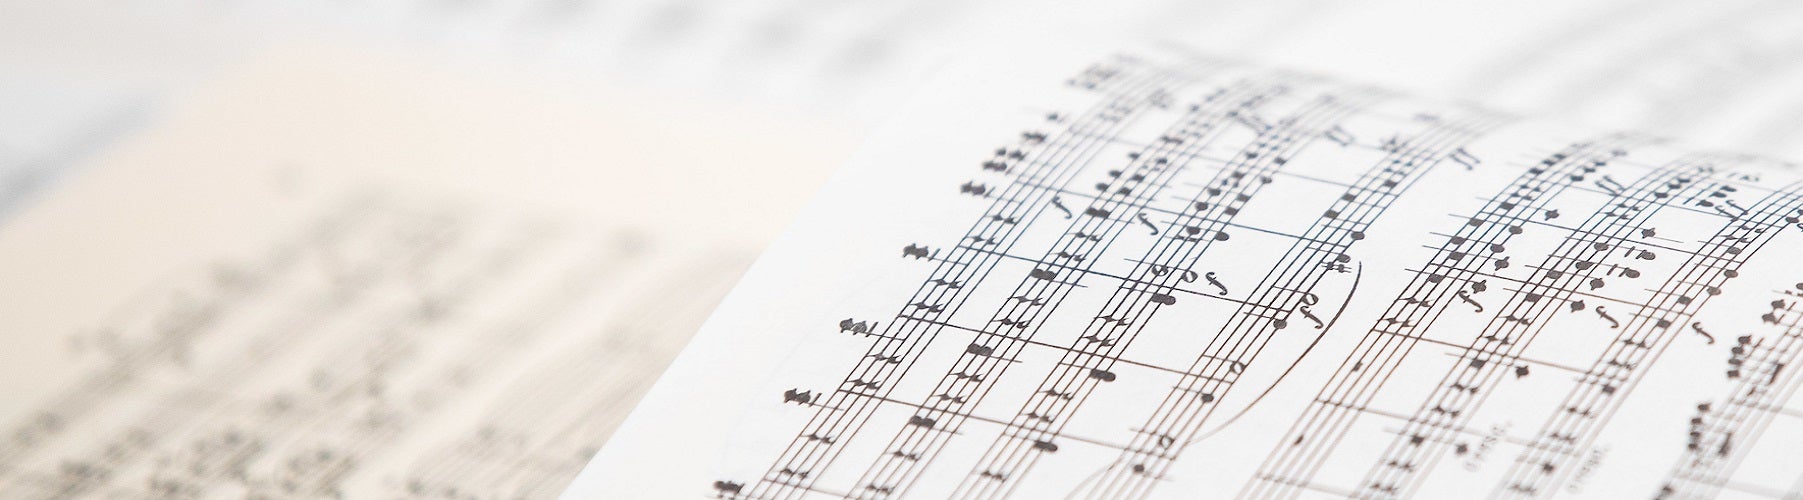 two musical scores open to the middle of composers work.  